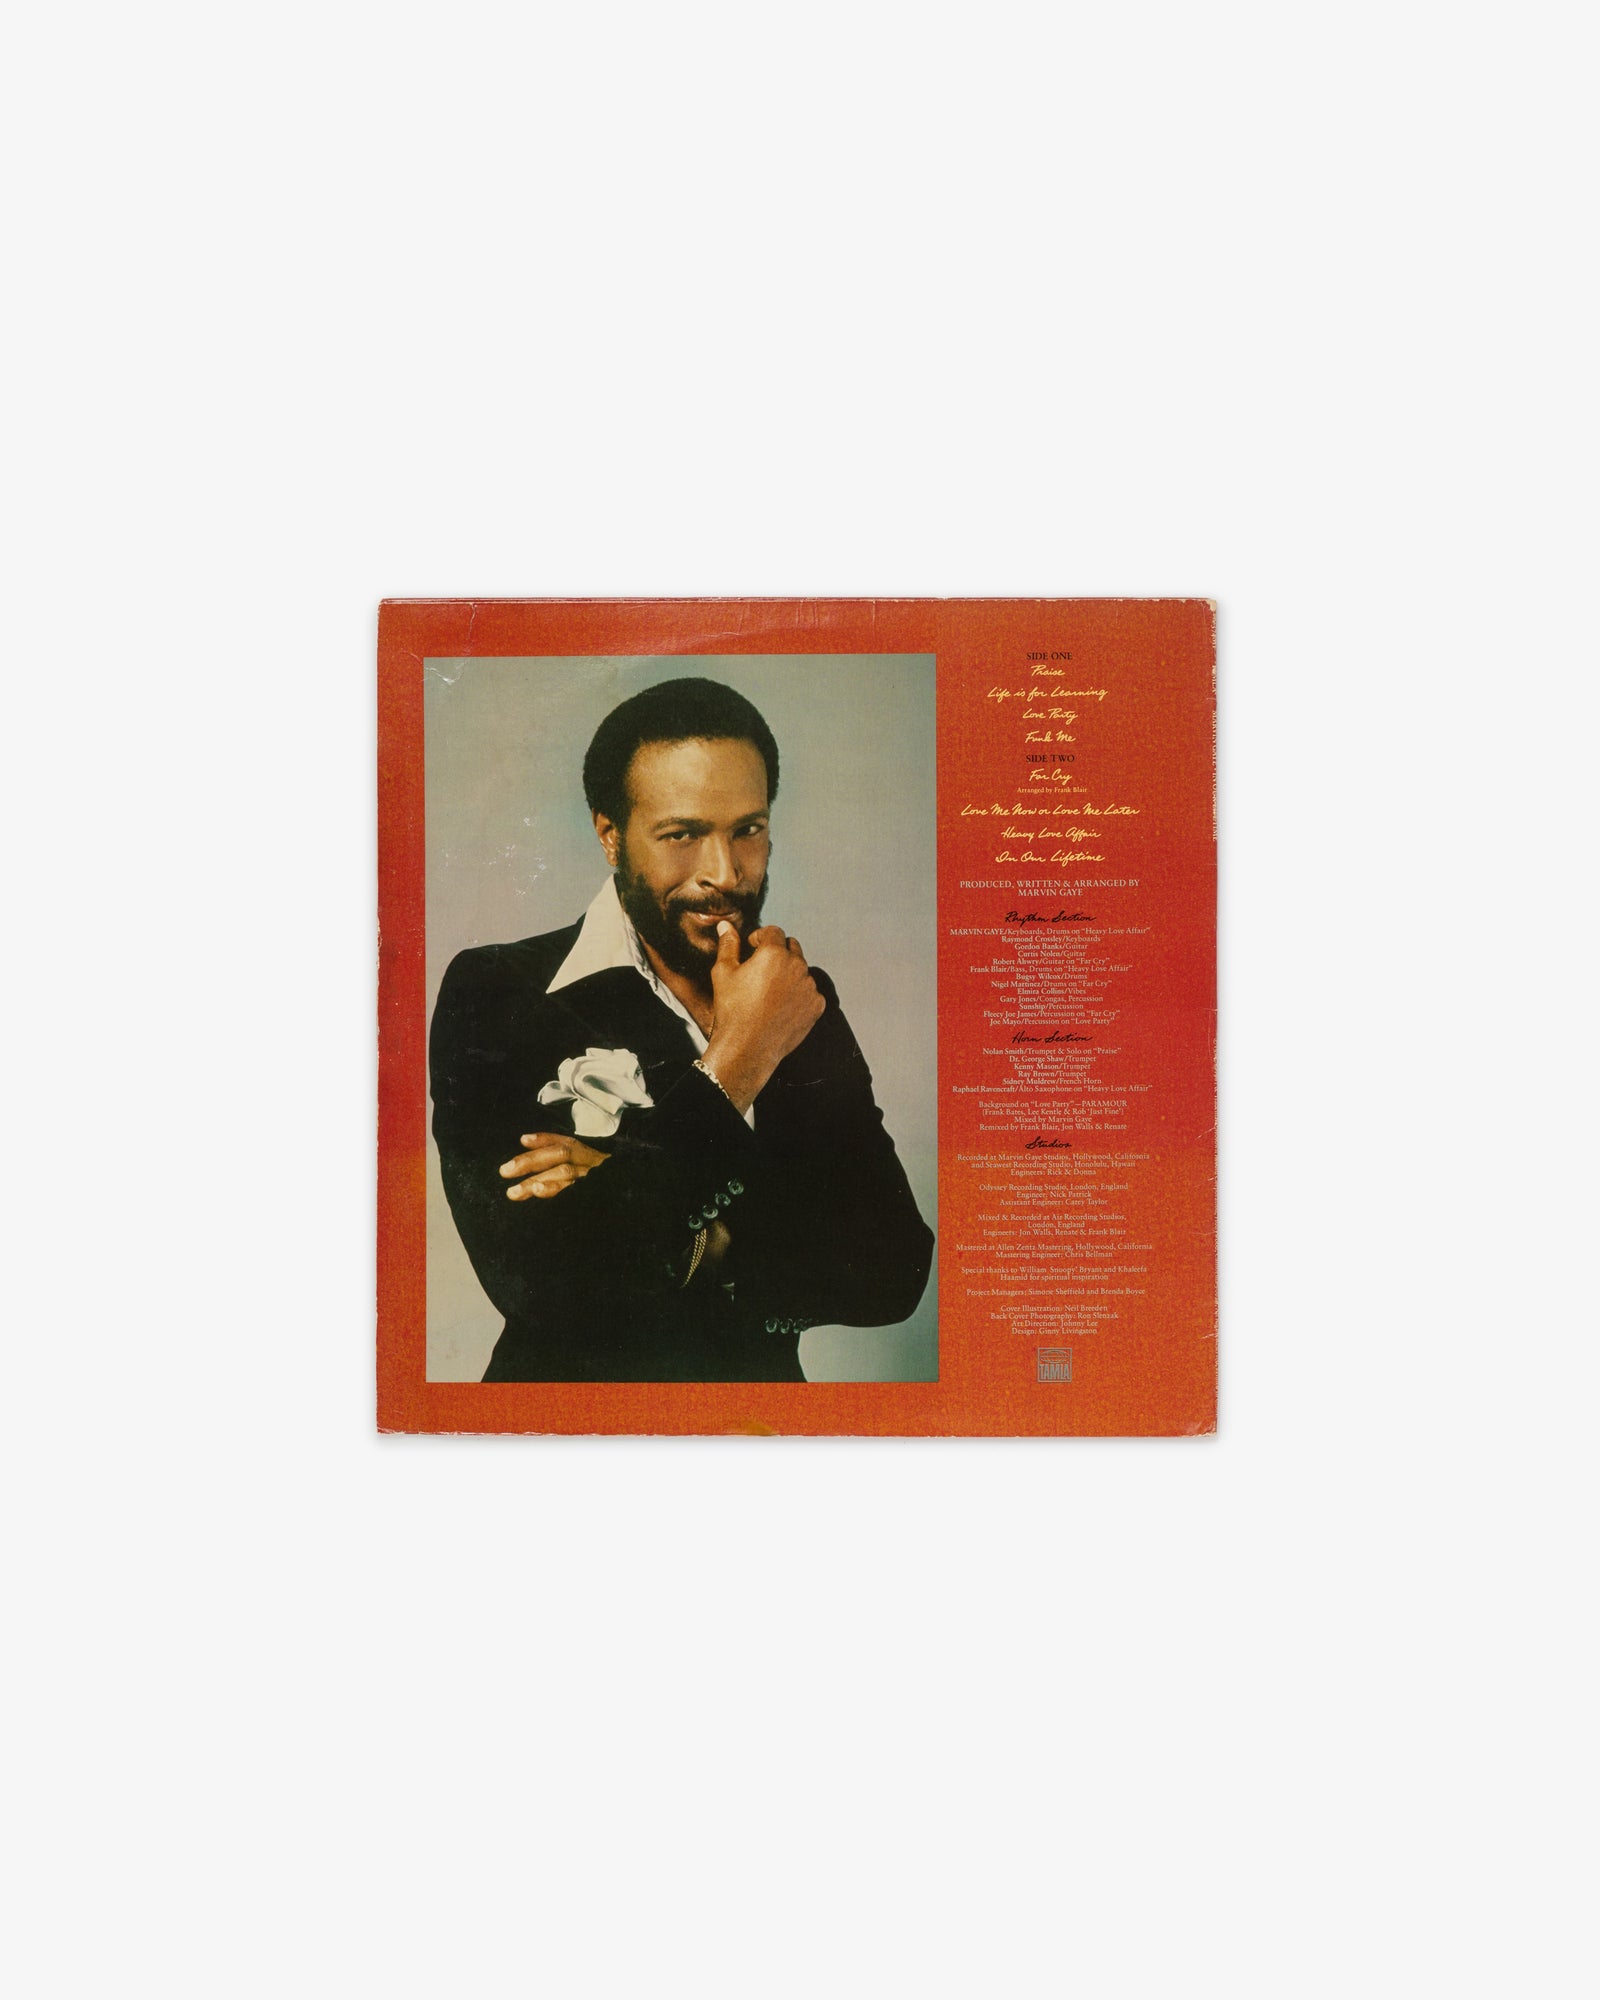 Marvin Gaye - In Our Lifetime LP